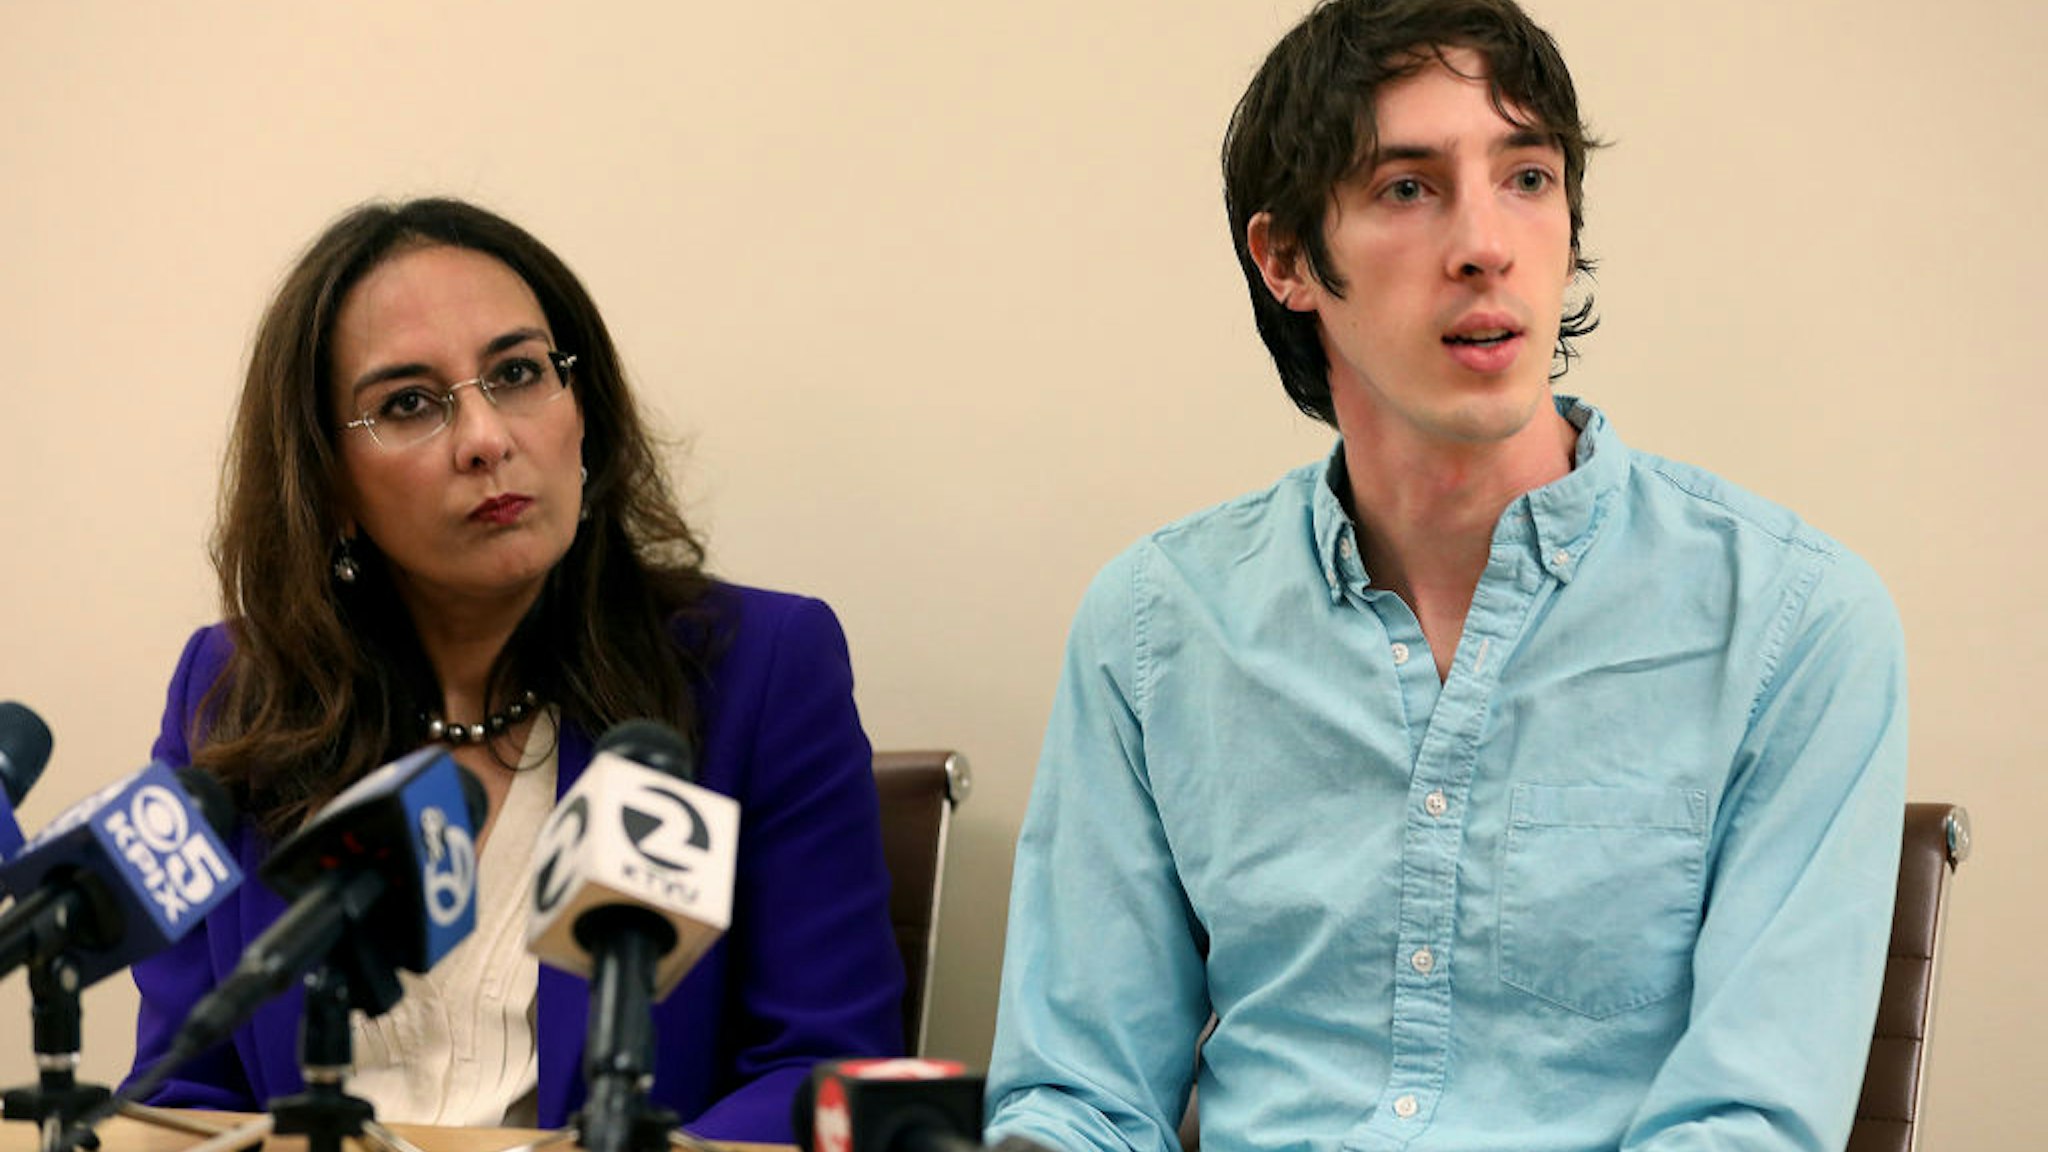 James Damore, a former Google employee who wrote a controversial diversity memo, appears alongside attorney Harmeet Dhillon during a press conference Monday, Jan. 8, 2018, in San Francisco, Calif., announcing a lawsuit against his former employer.